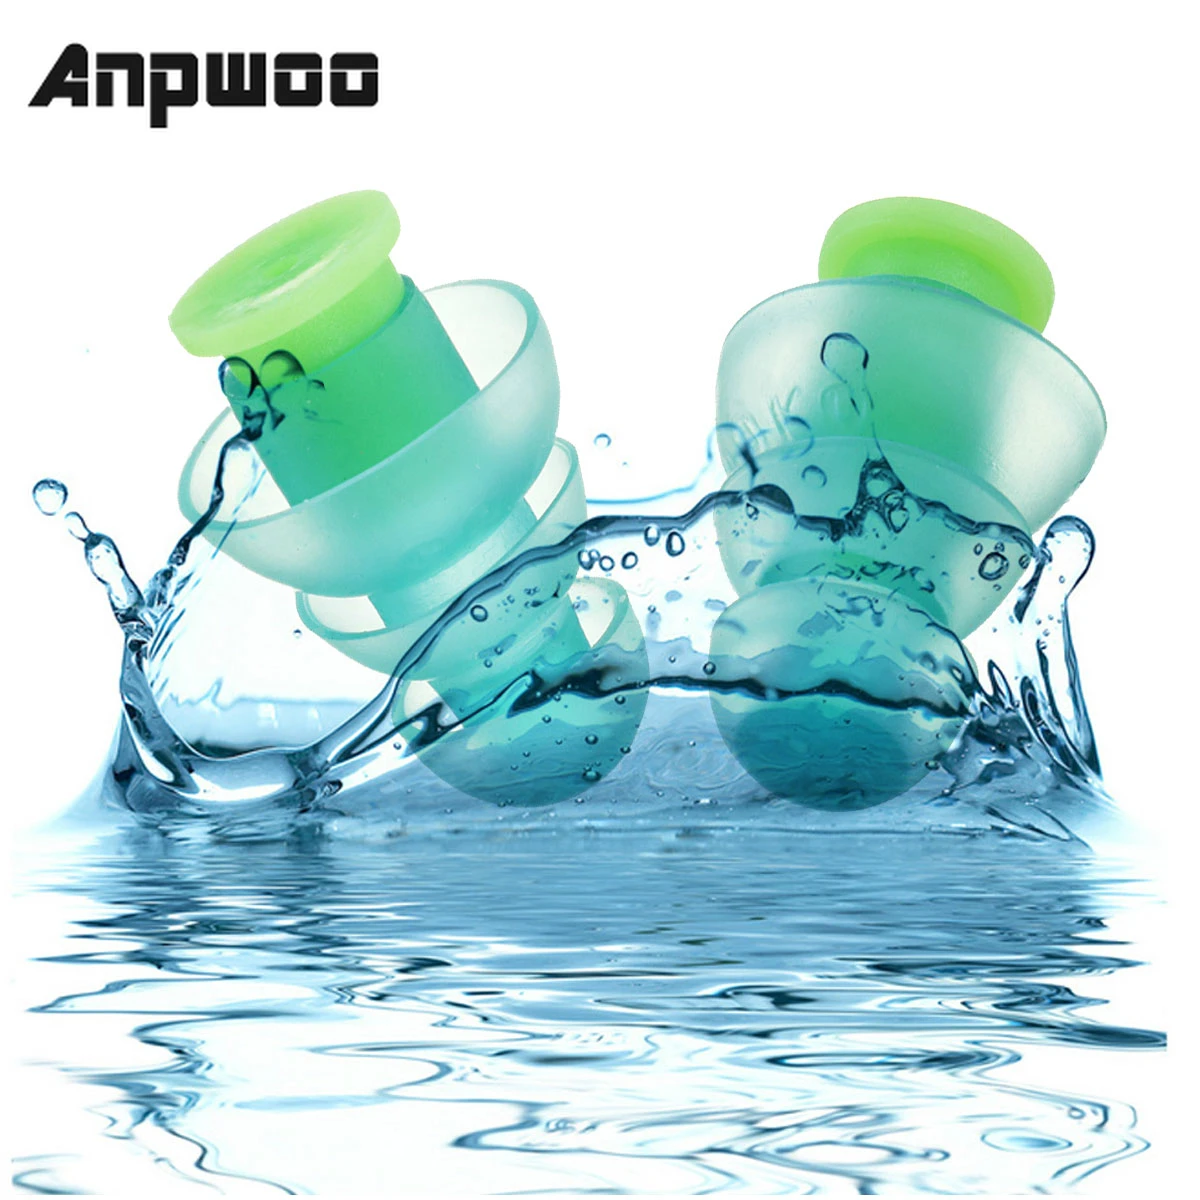 

ANPWOO 1 Pair Noise Cancelling Hearing Protection Earplugs For Concerts Musician Motorcycles Reusable Silicone Ear plugs